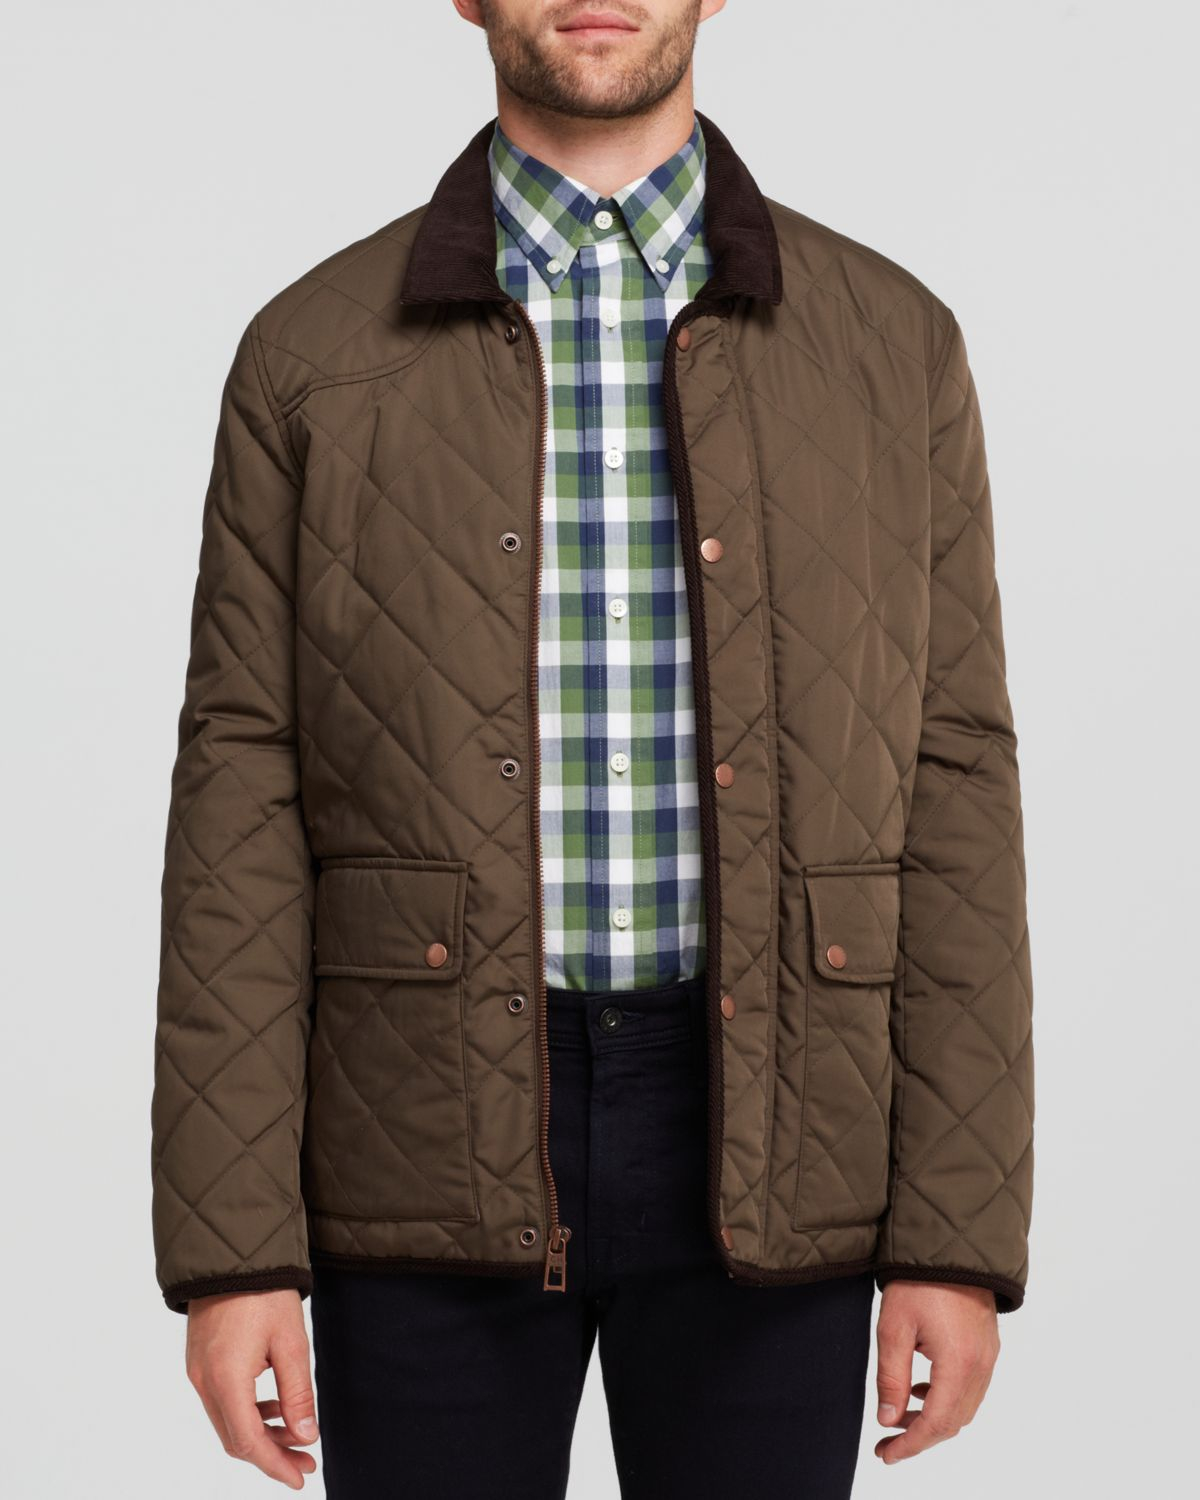 Cole Haan Men's Quilted Nylon Barn Jacket with Corduroy Details 